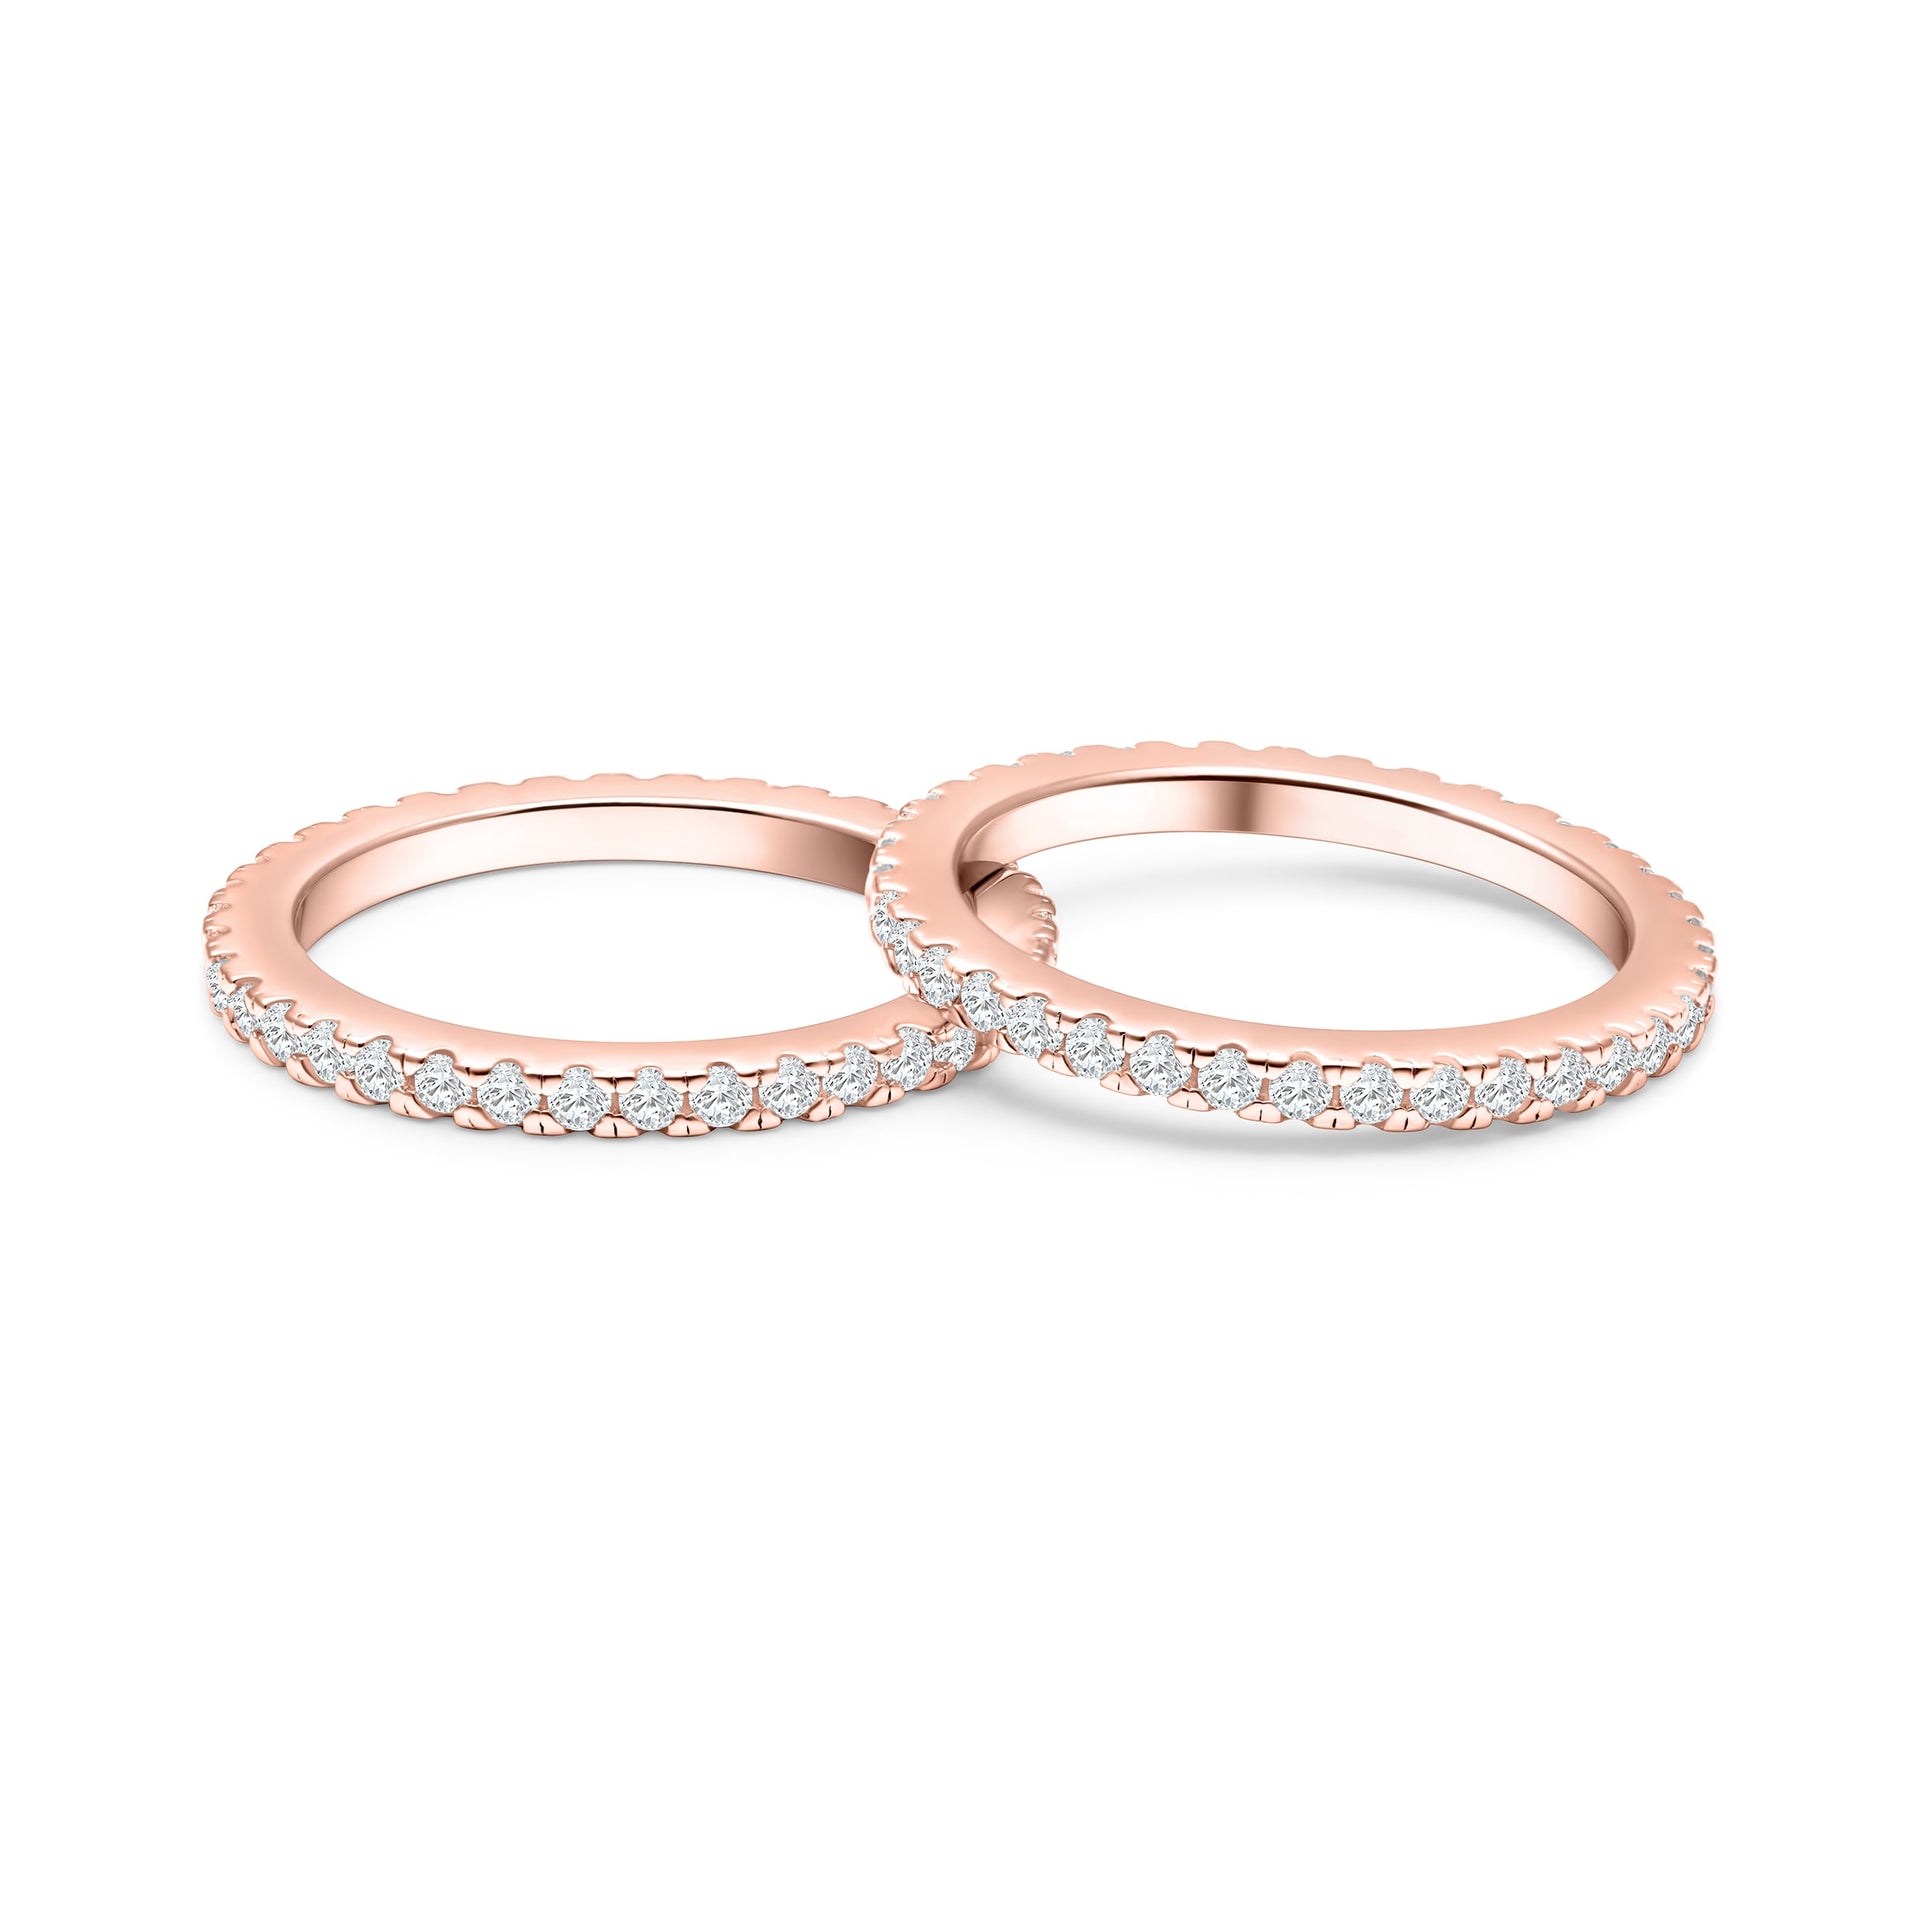 gorgeous wedding band set shown in rose gold great for stacking